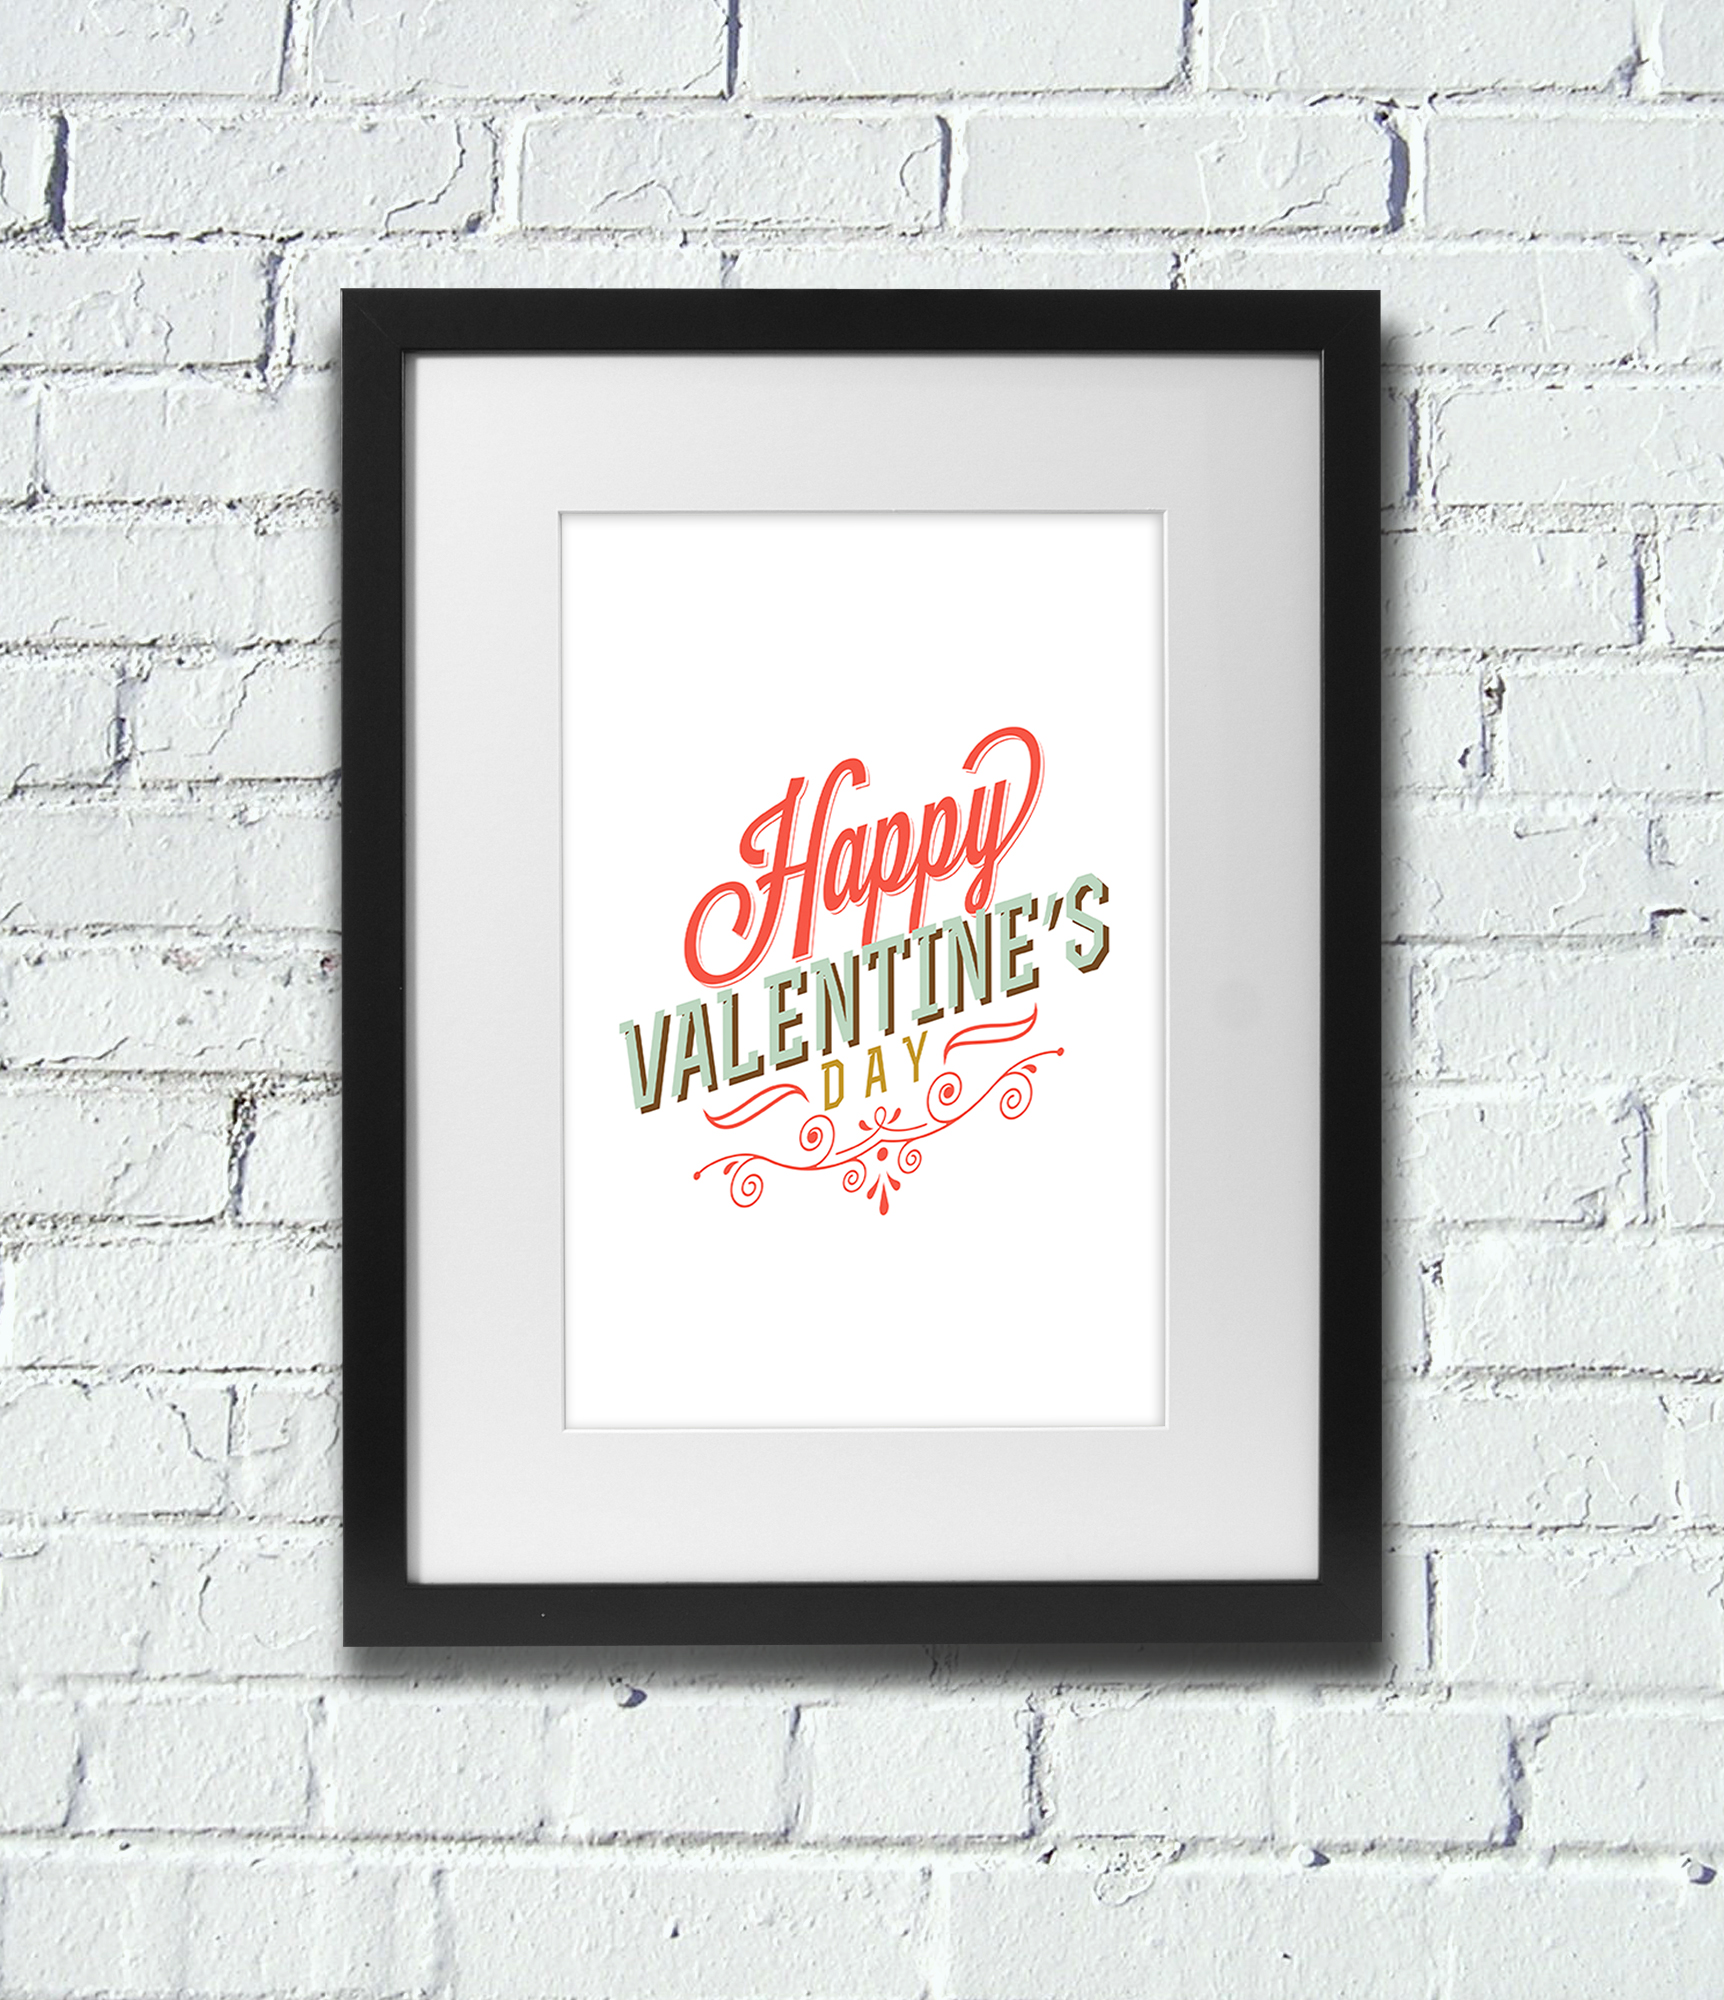 hello-again-free-printable-valentine-s-day-wall-art-the-graffical-muse